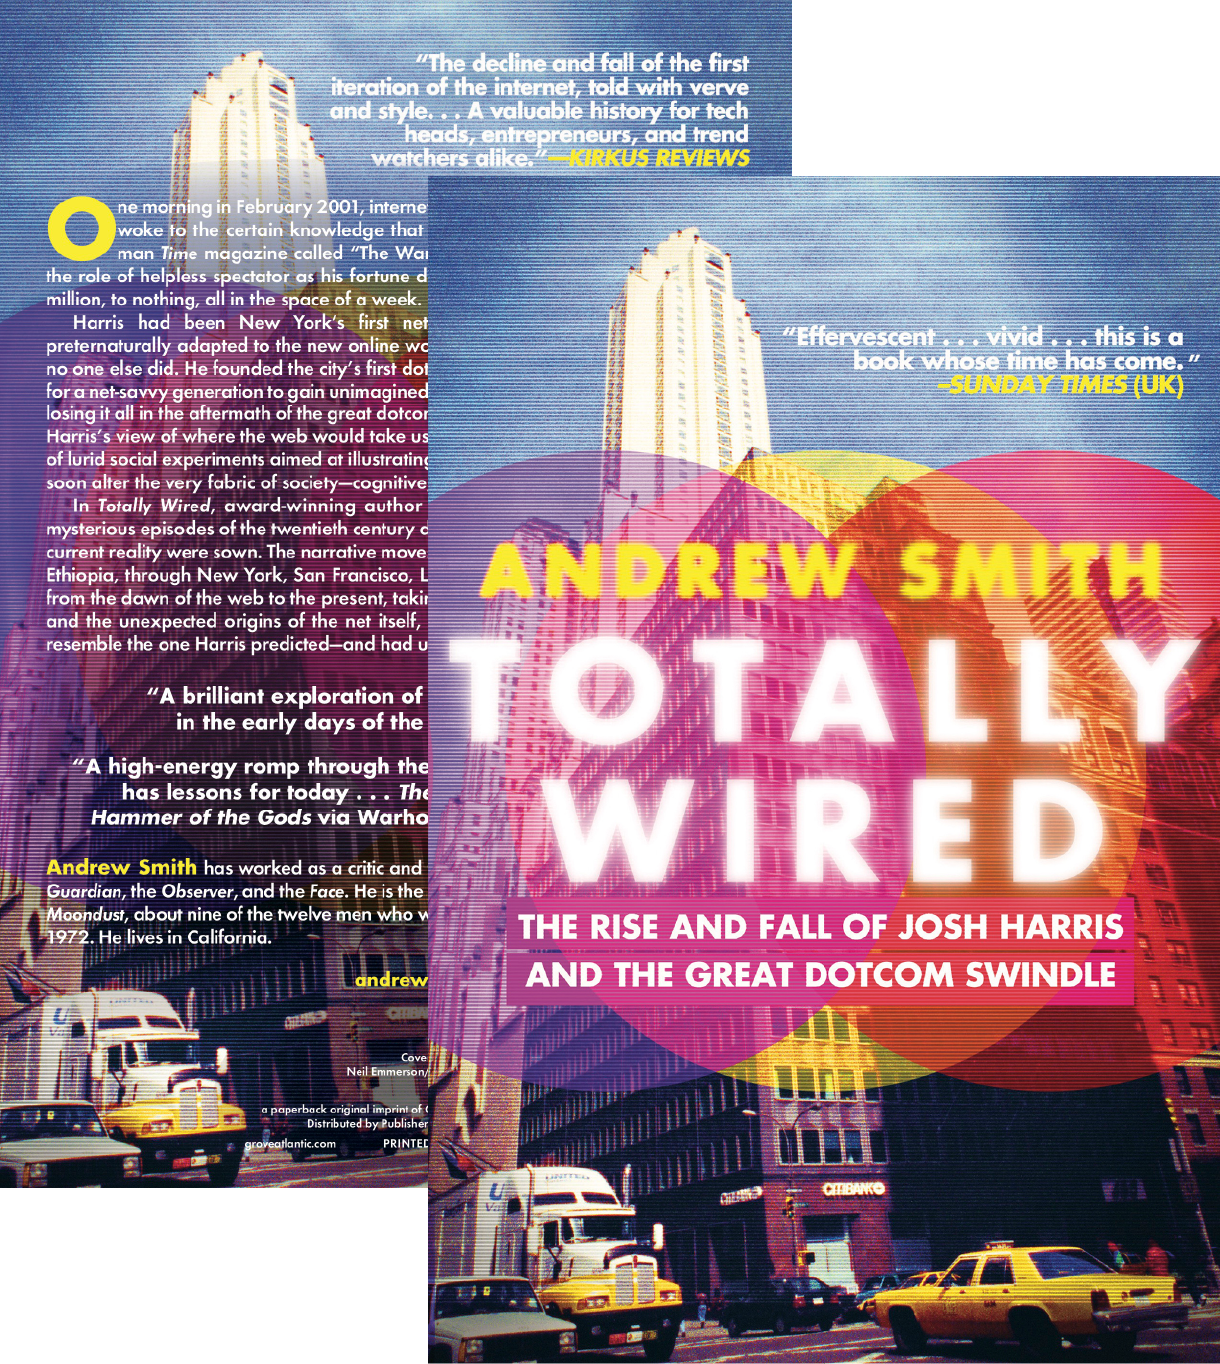 Totally Wired book cover